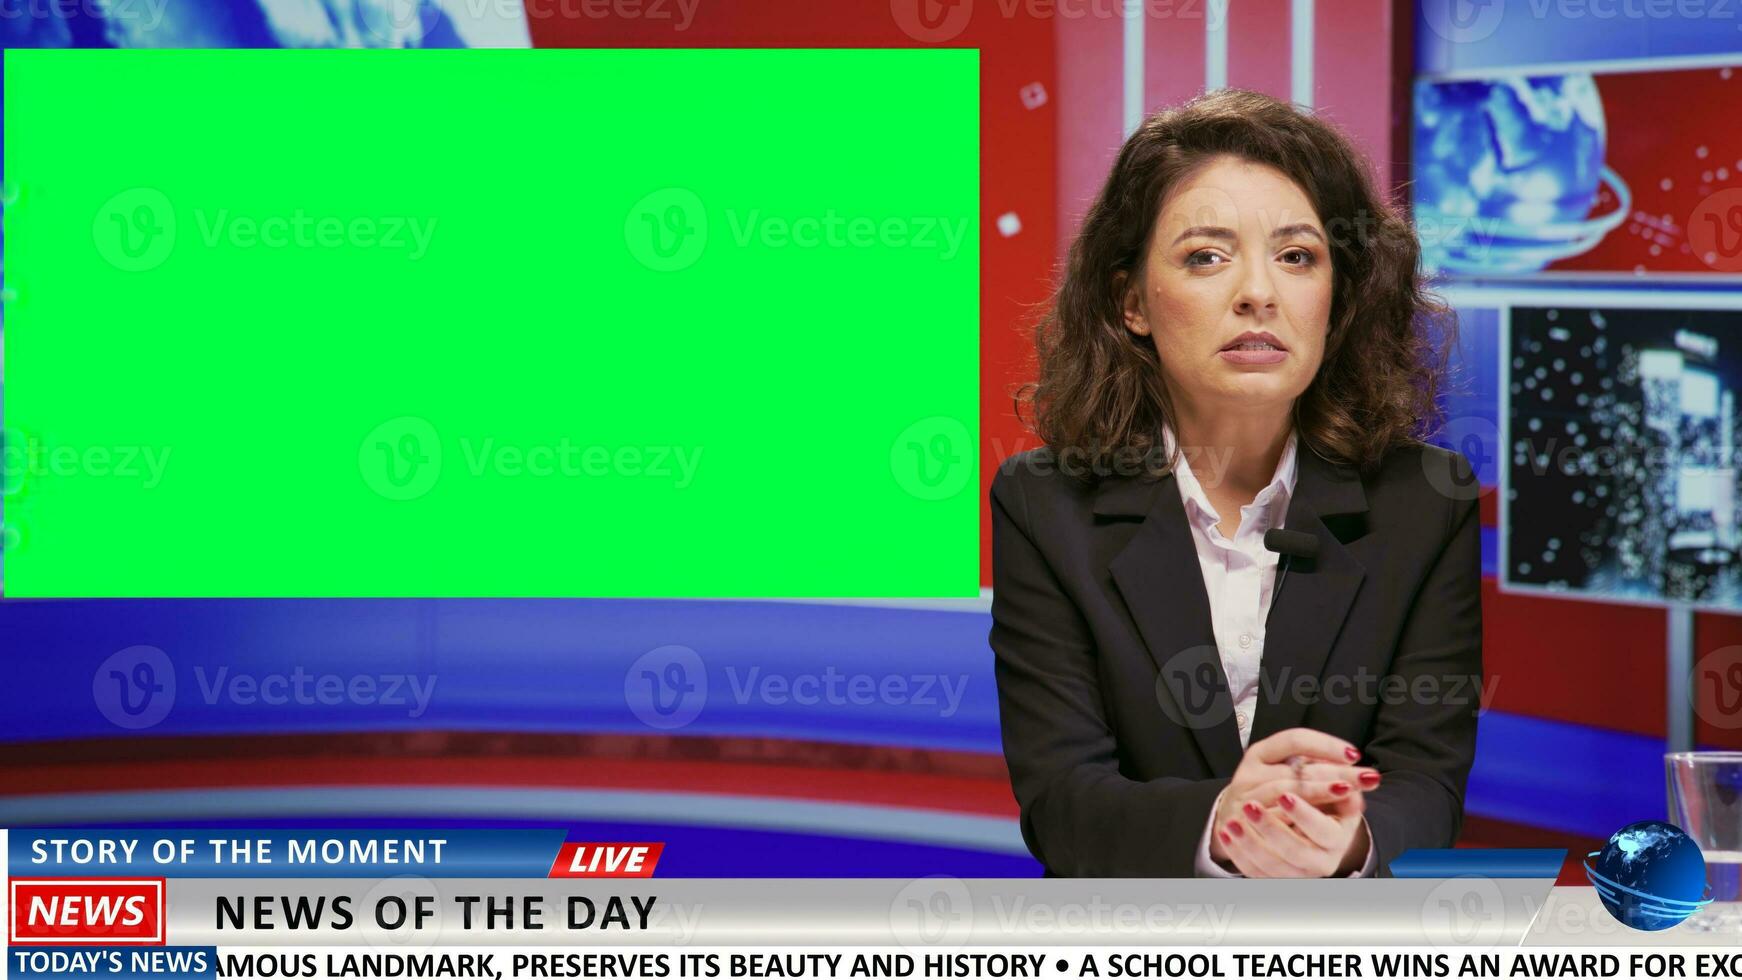 Media host presents news on greenscreen template, using isolated chromakey mockup in newsroom studio. Woman journalist working on daily news segment for live television content. photo